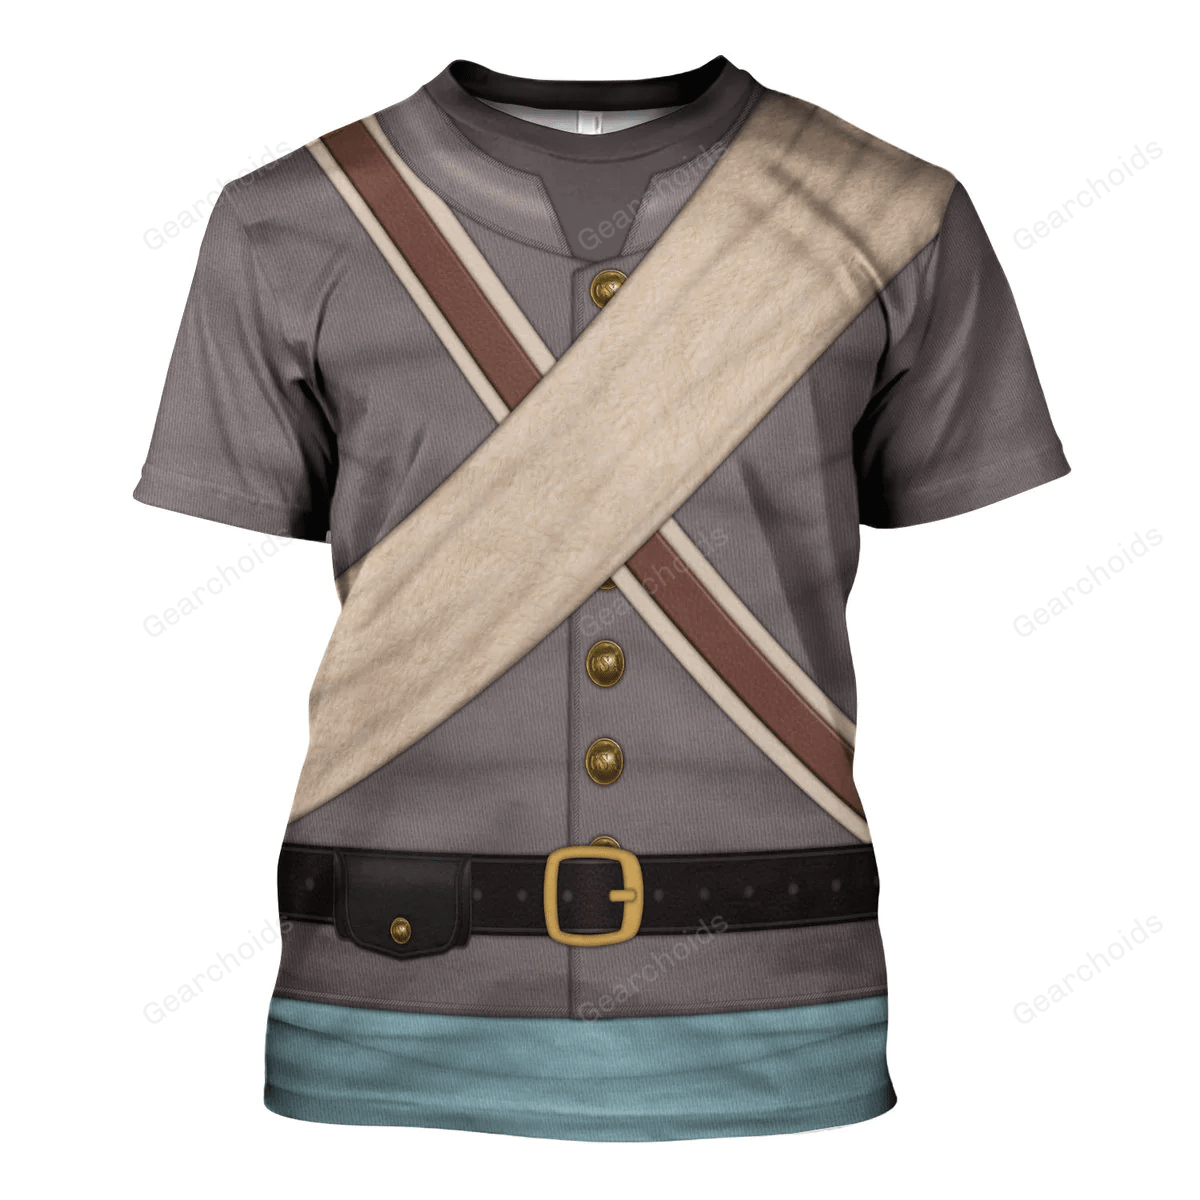 American Union Army Infantry Private Soldier Uniform T-Shirt